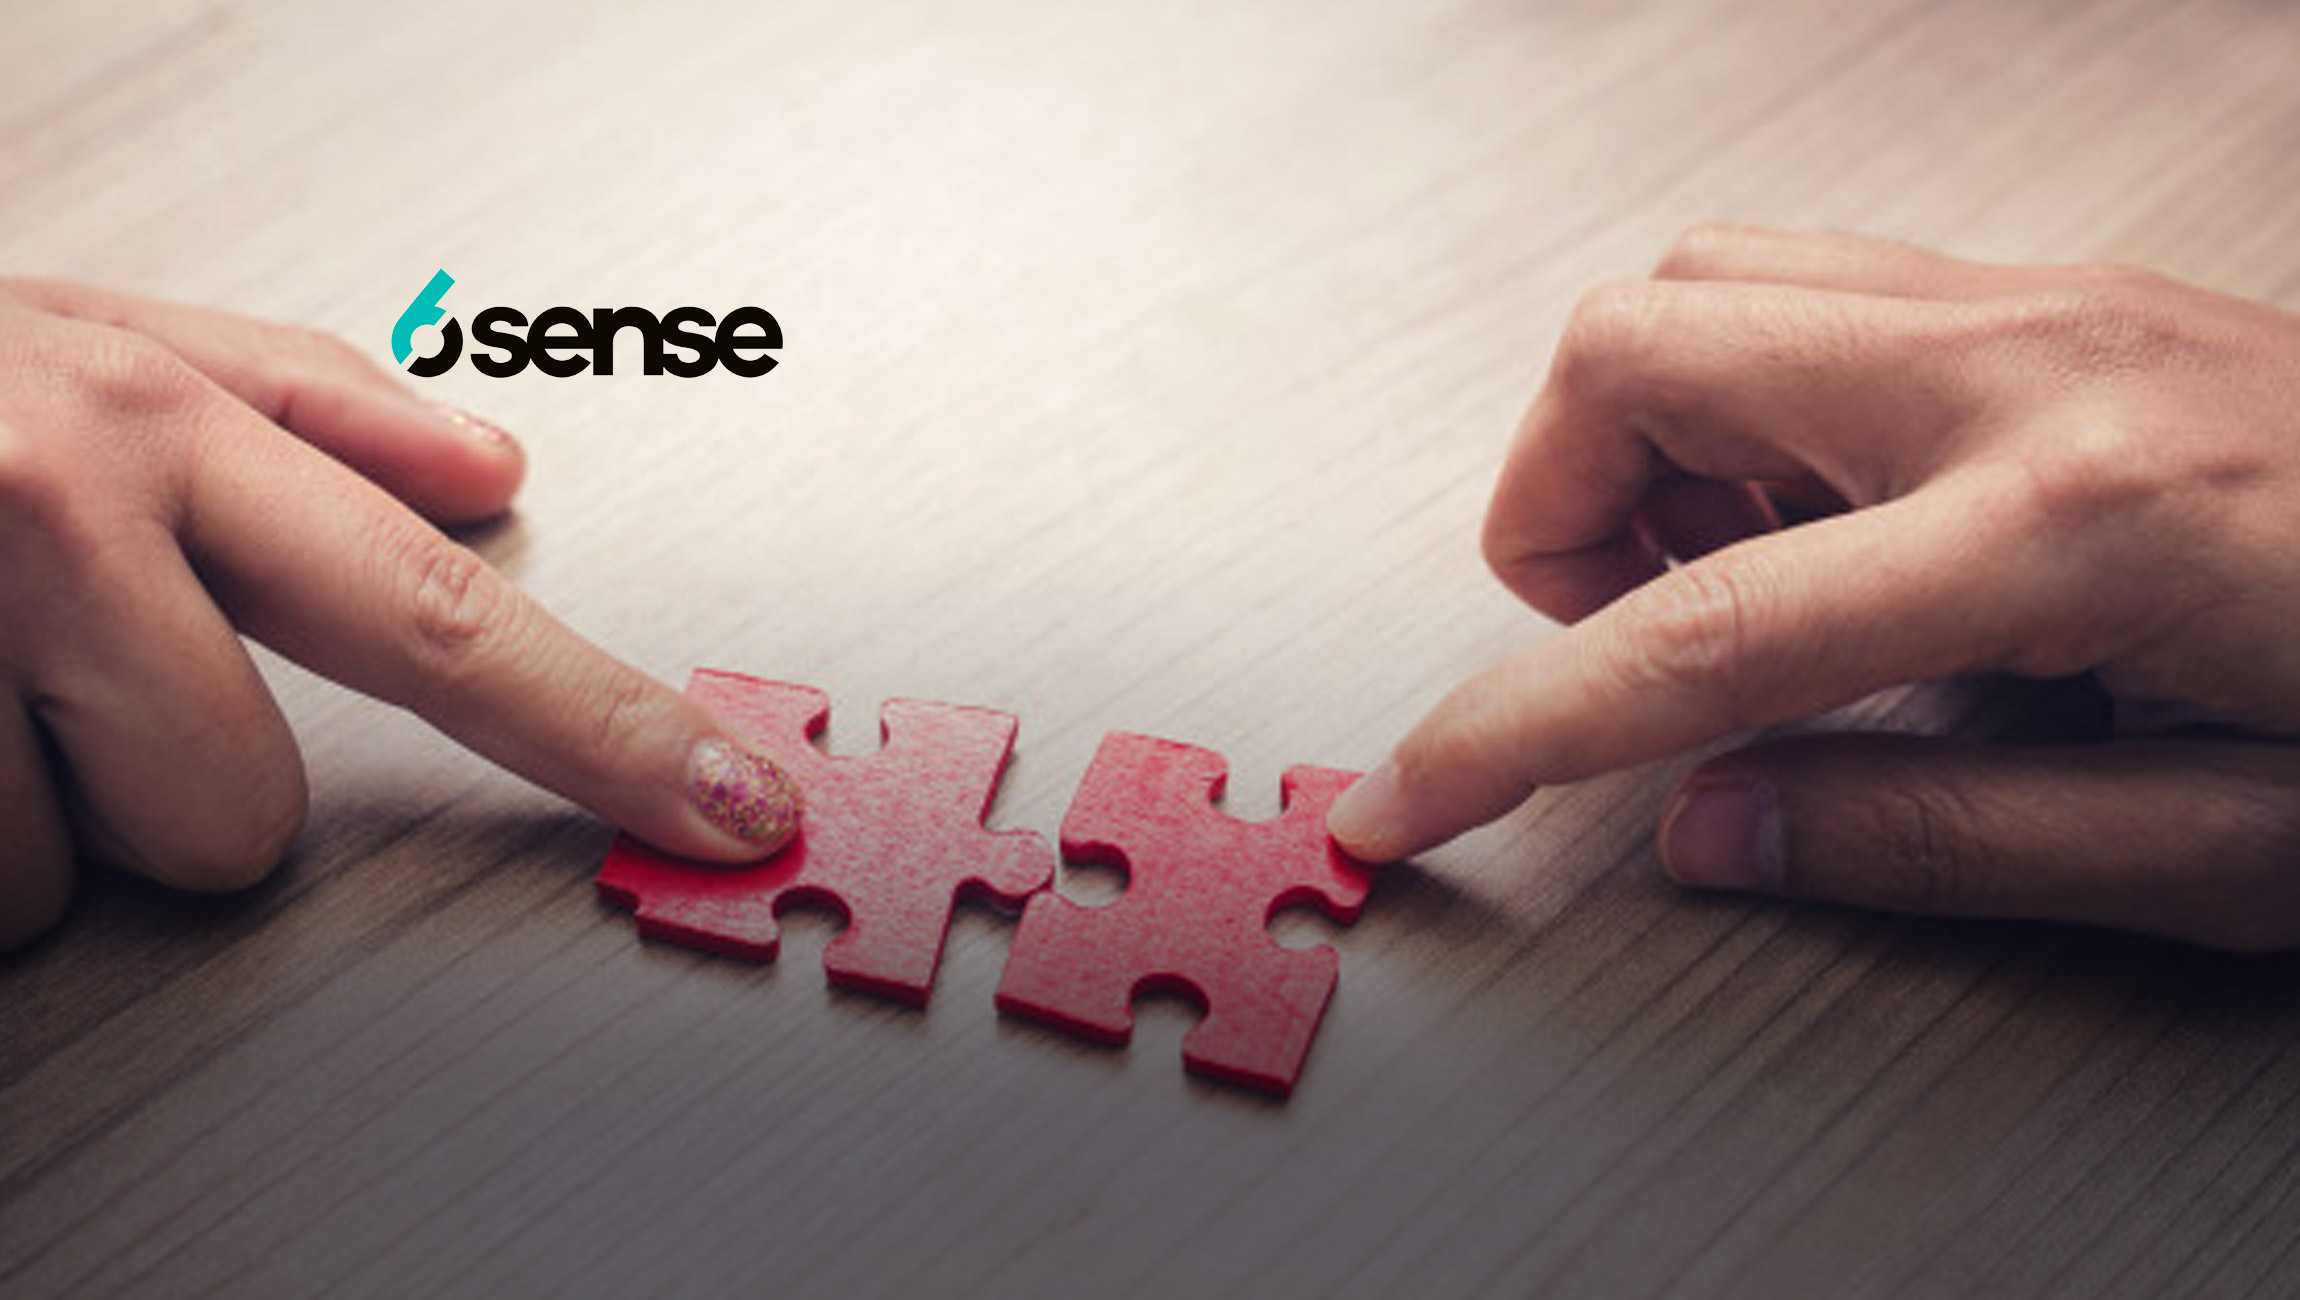 6sense Launches Next Best Actions to Help Prospecting Teams Better Engage Target Accounts